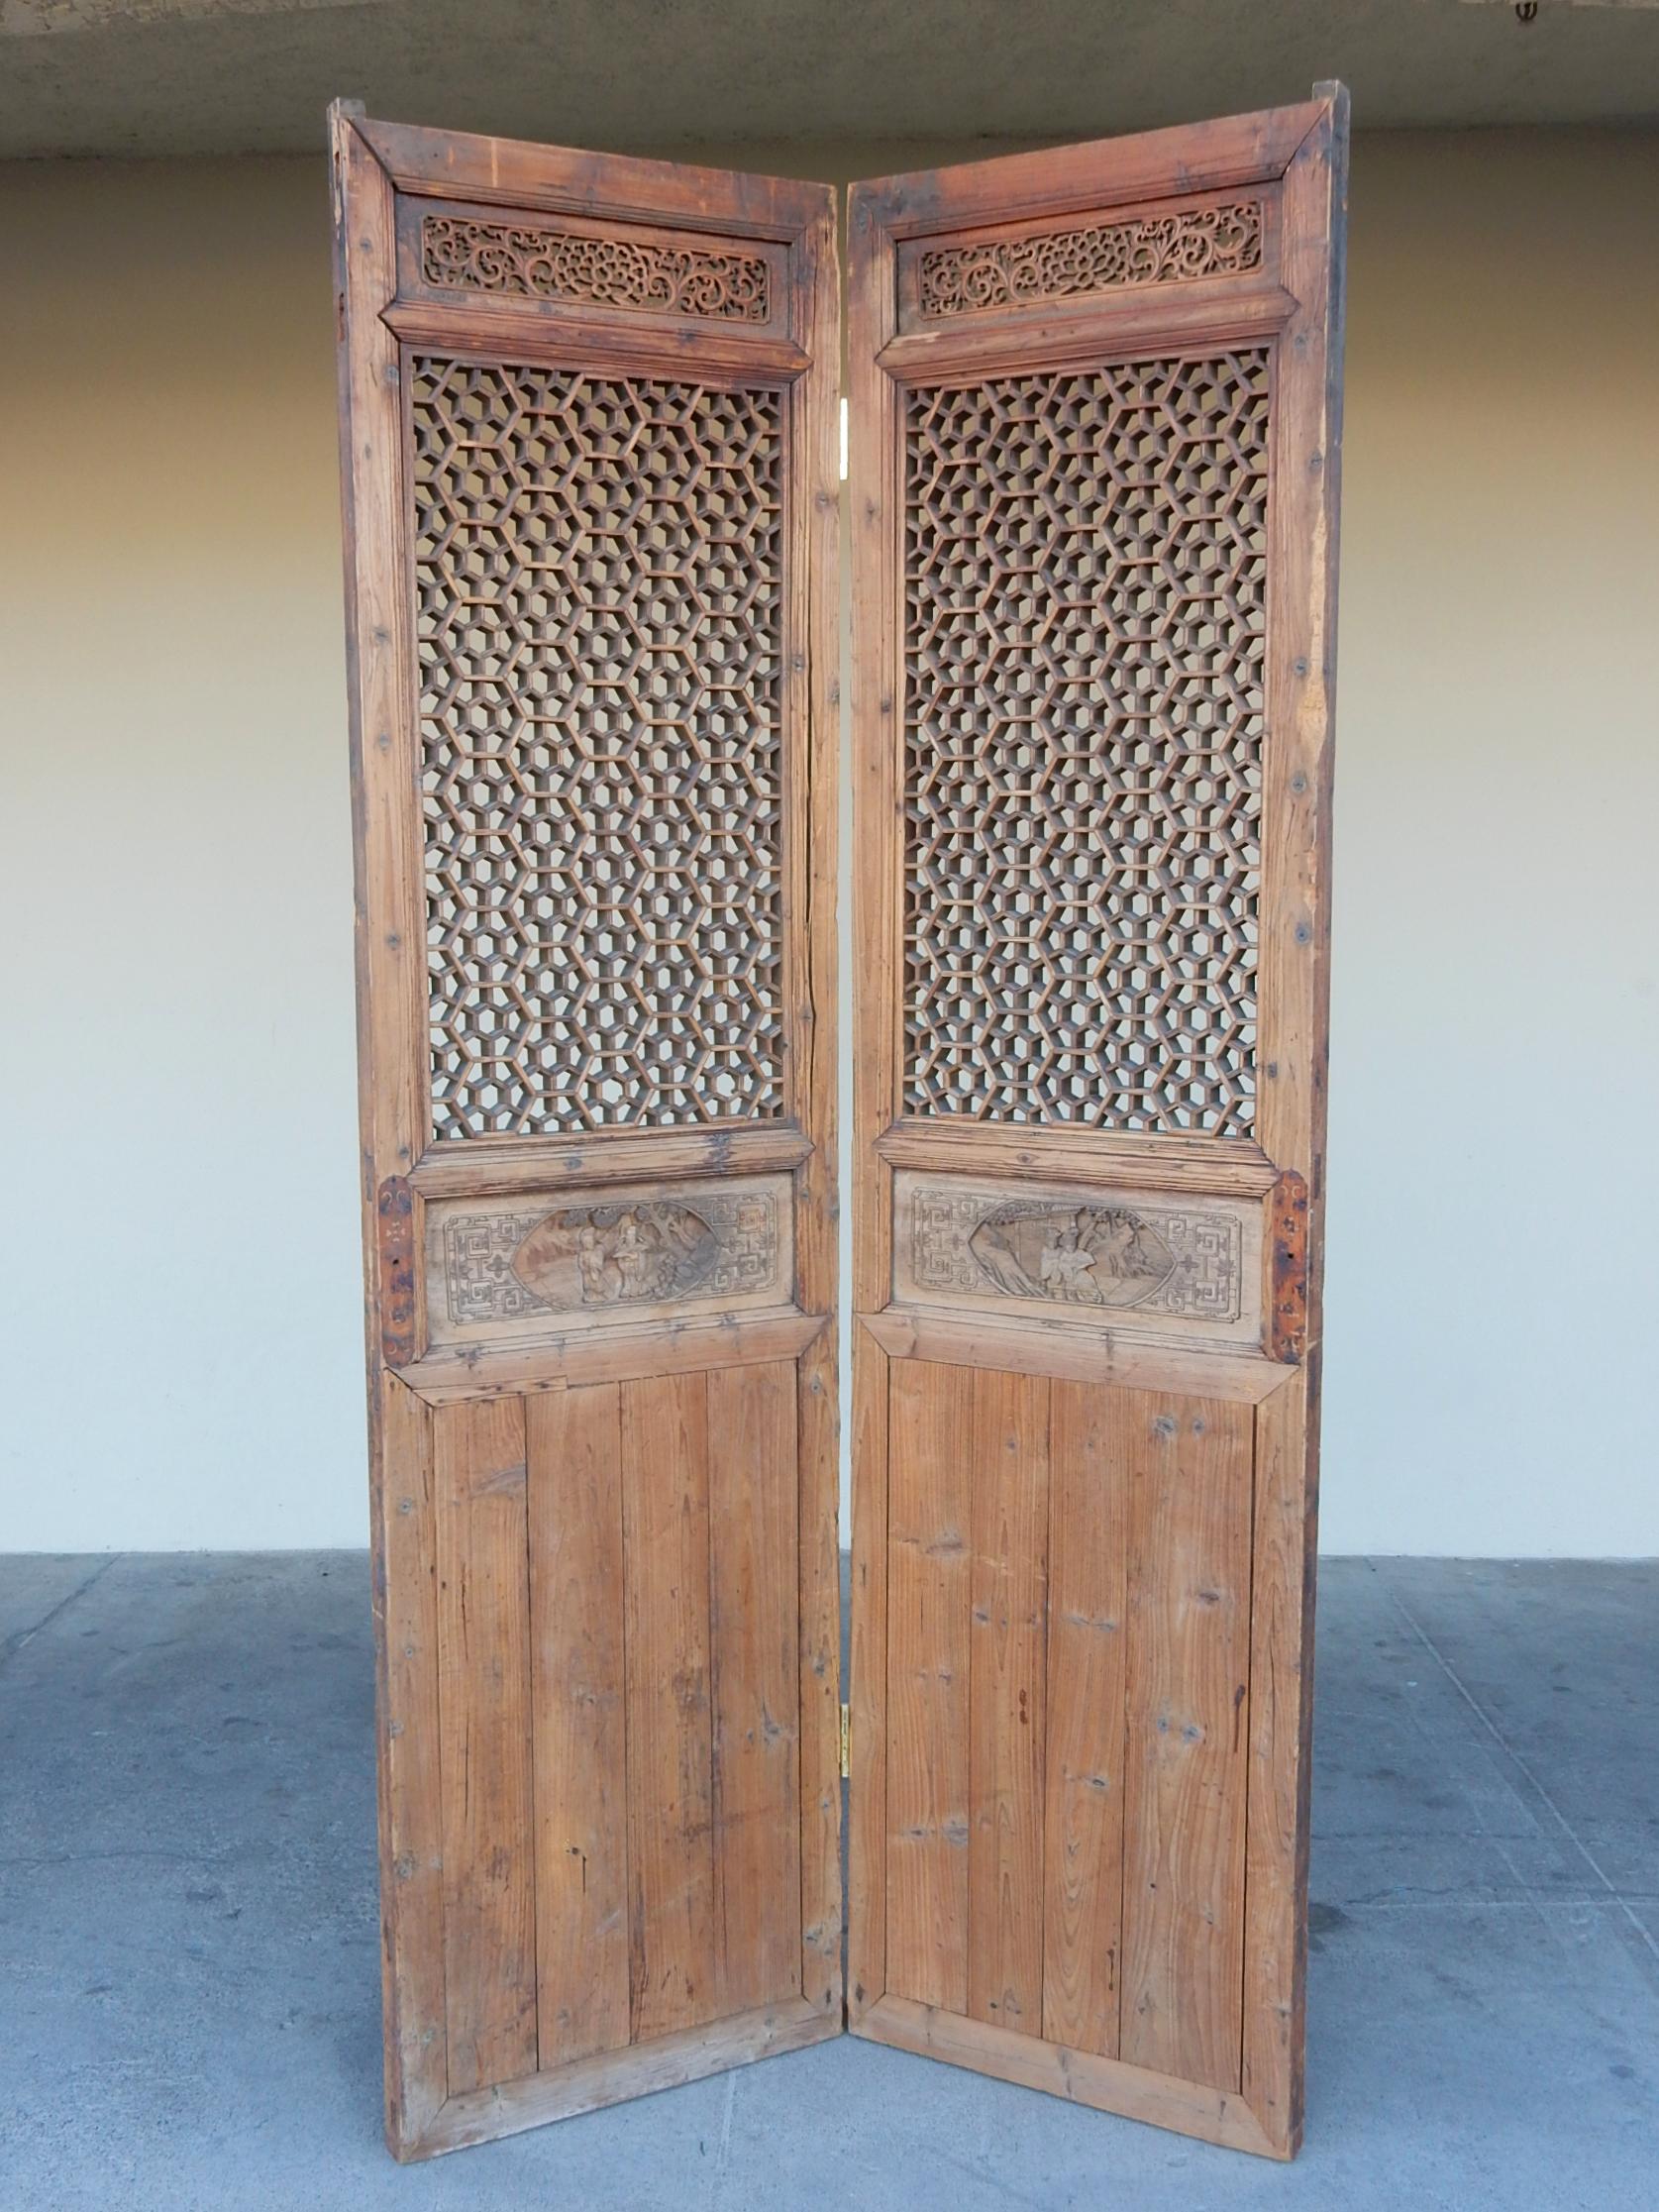 A pair of late 19th century China entry doors with
incredible honeycomb lattice-work. Floral scroll panels at top.
Carved figures across center. Center hinges were added to make them a
spectacular room divider screen.
Stands over 7-1/2 feet